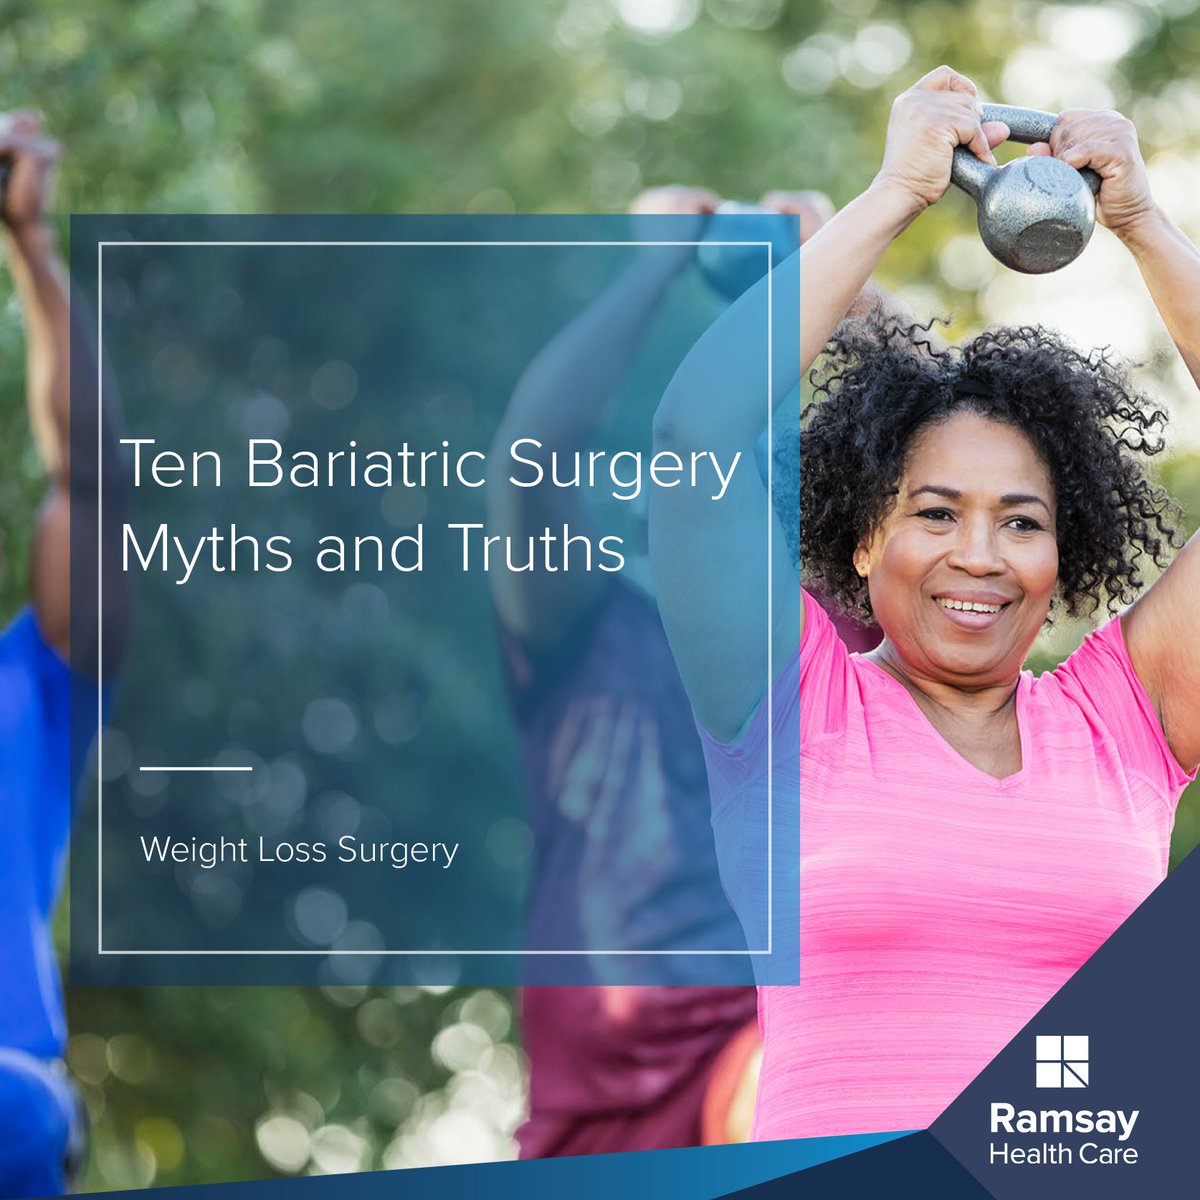 In this month’s article by Ramsay’s Specialist Dietitian, Nichola Ludlam-Raine, we aim to dispel the 10 myths surrounding weight loss surgery to offer clarity and understanding. Read the full article here: ramsayhealth.co.uk/blog/weight-lo…